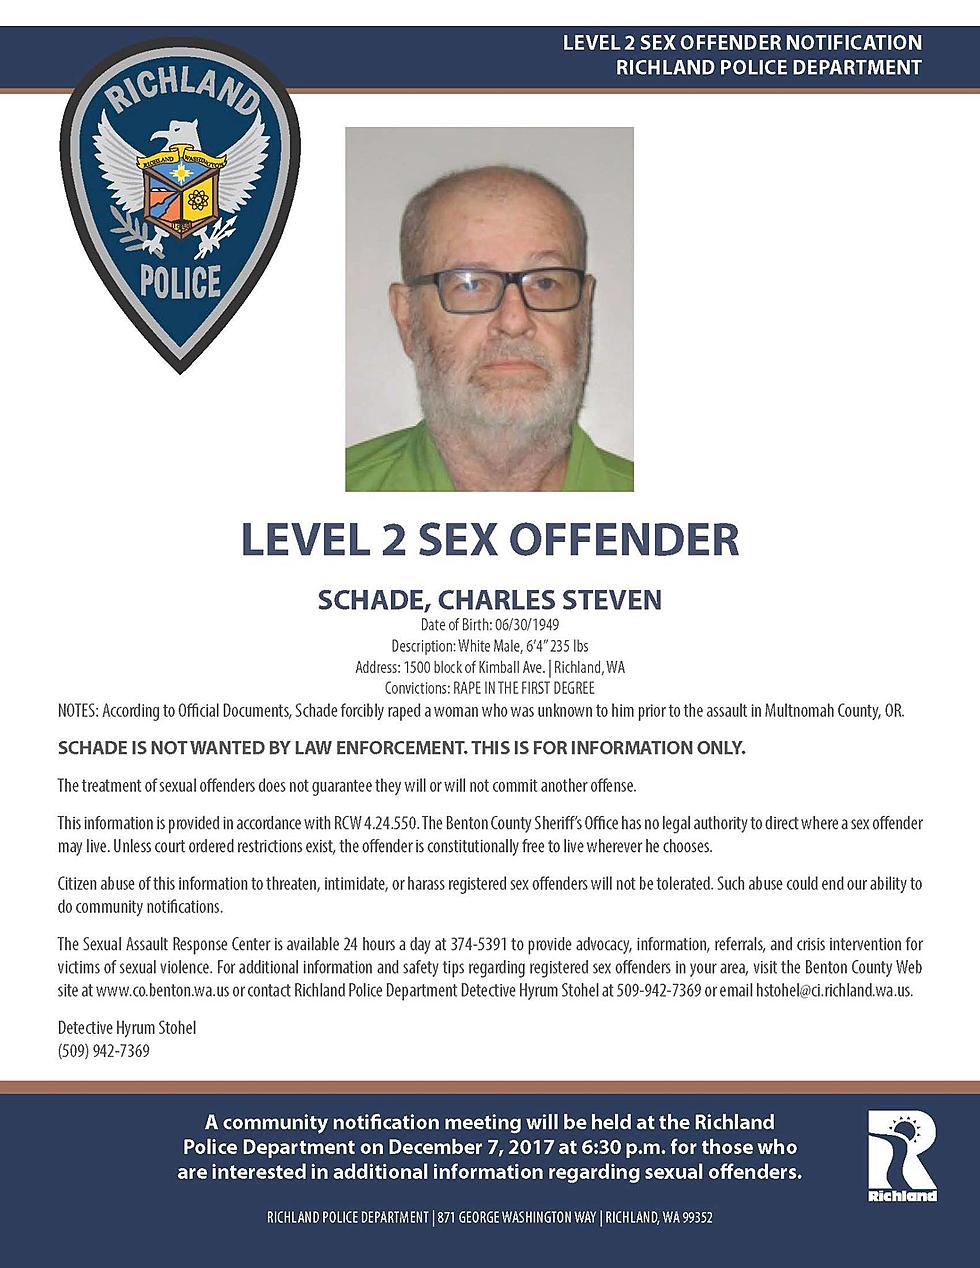 Richland Peeps! Level 2 Sex Offender Moving In!